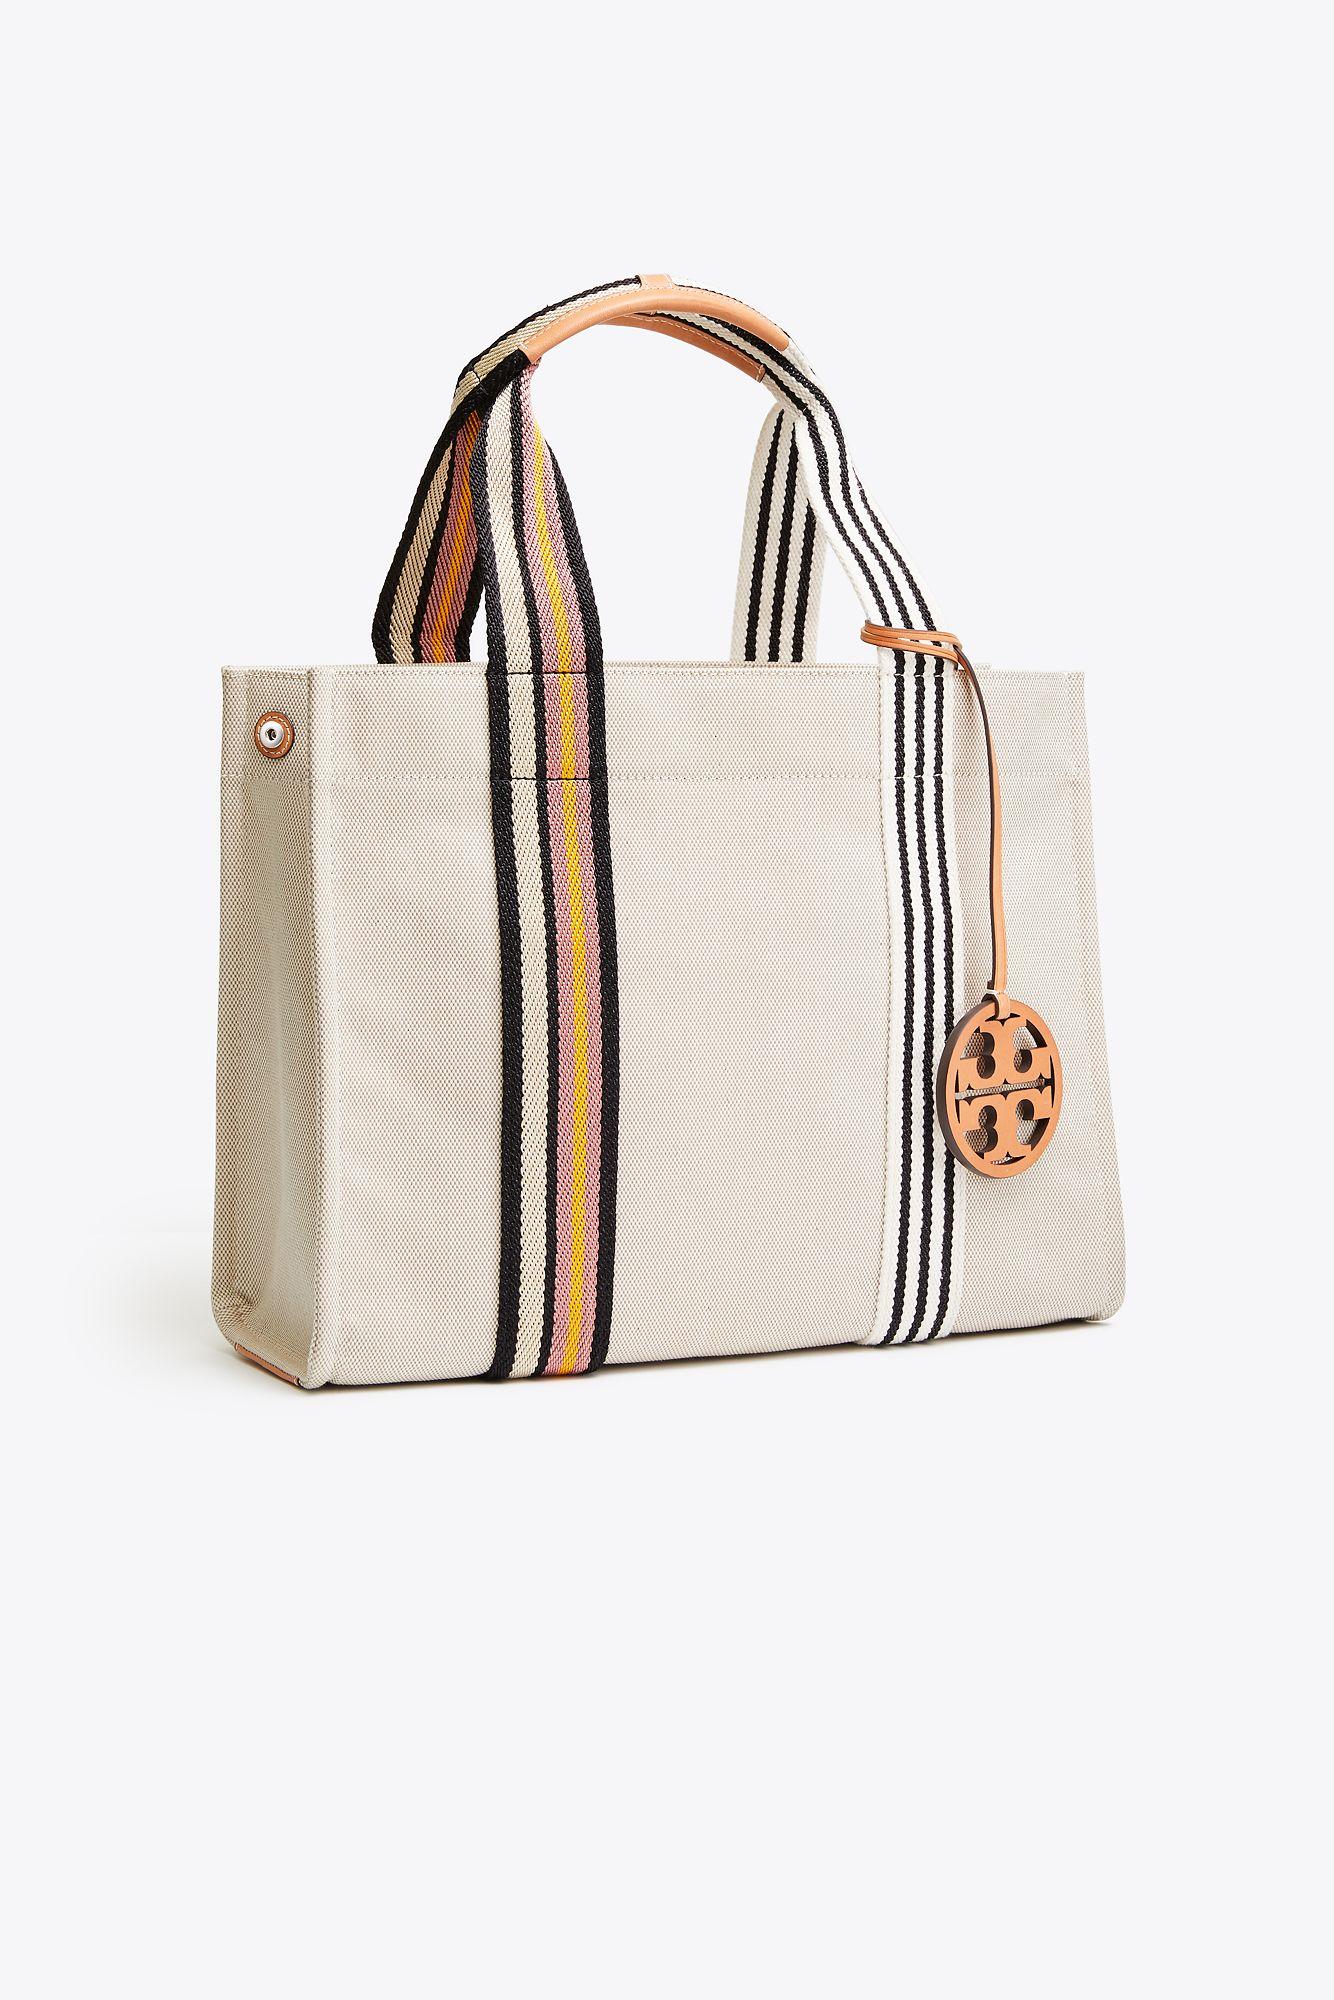 Tory Burch Miller Tote in Natural - Lyst